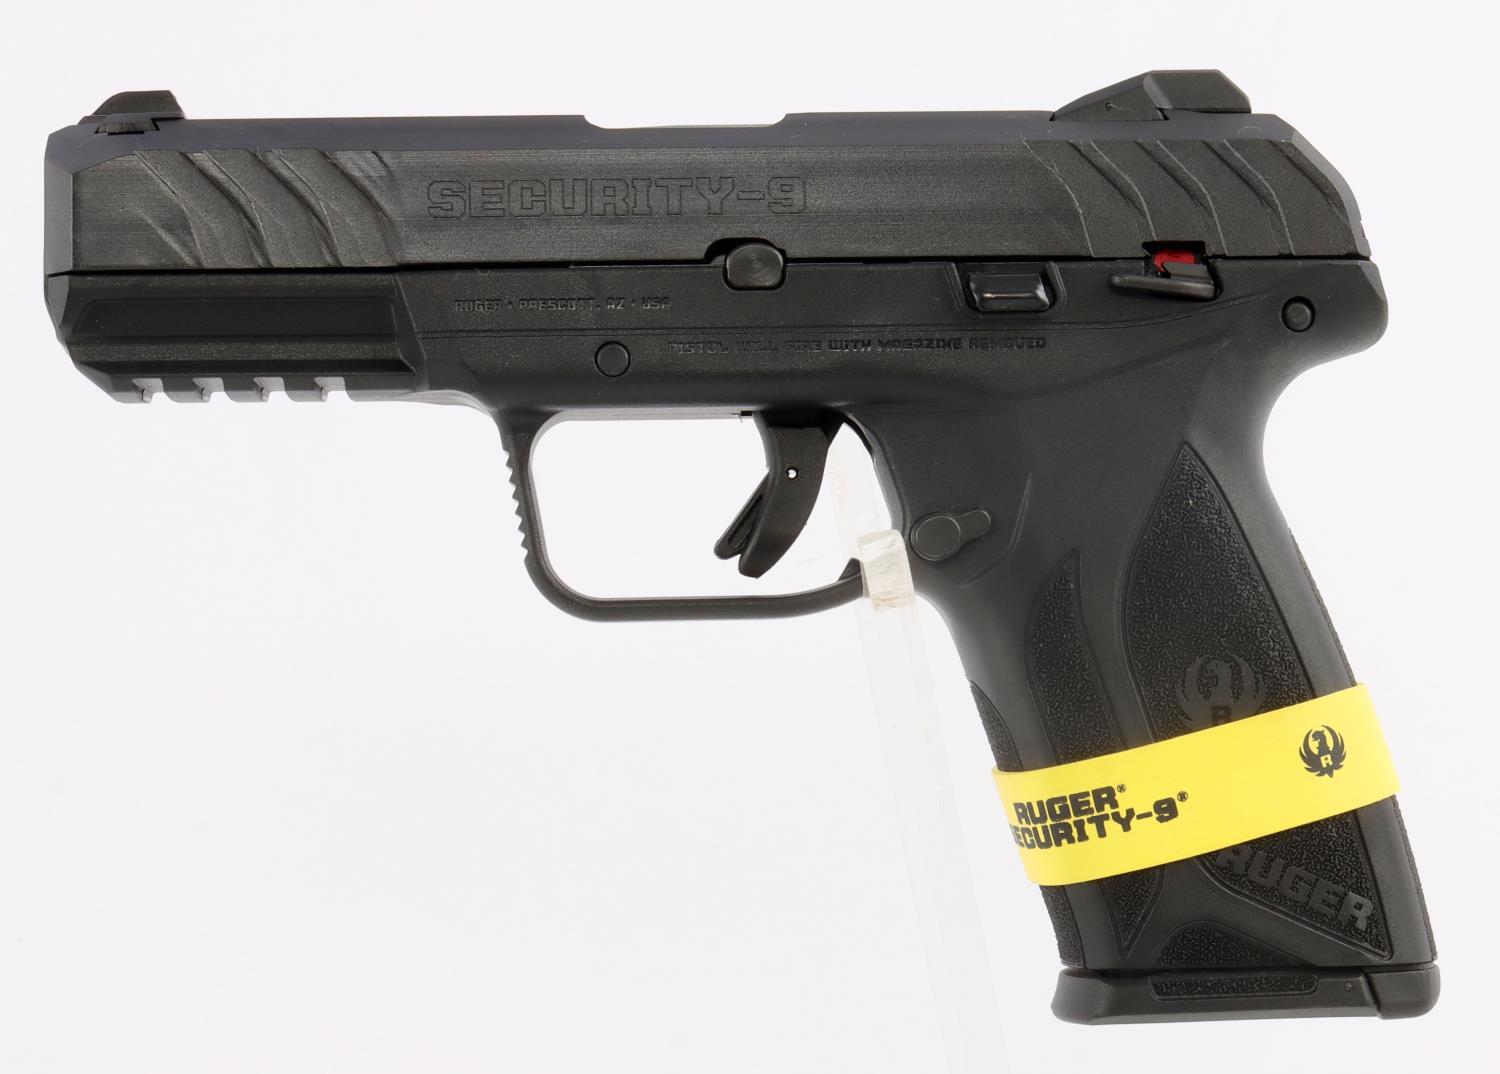 RUGER SECURITY 9 SEMI AUTOMATIC PISTOL